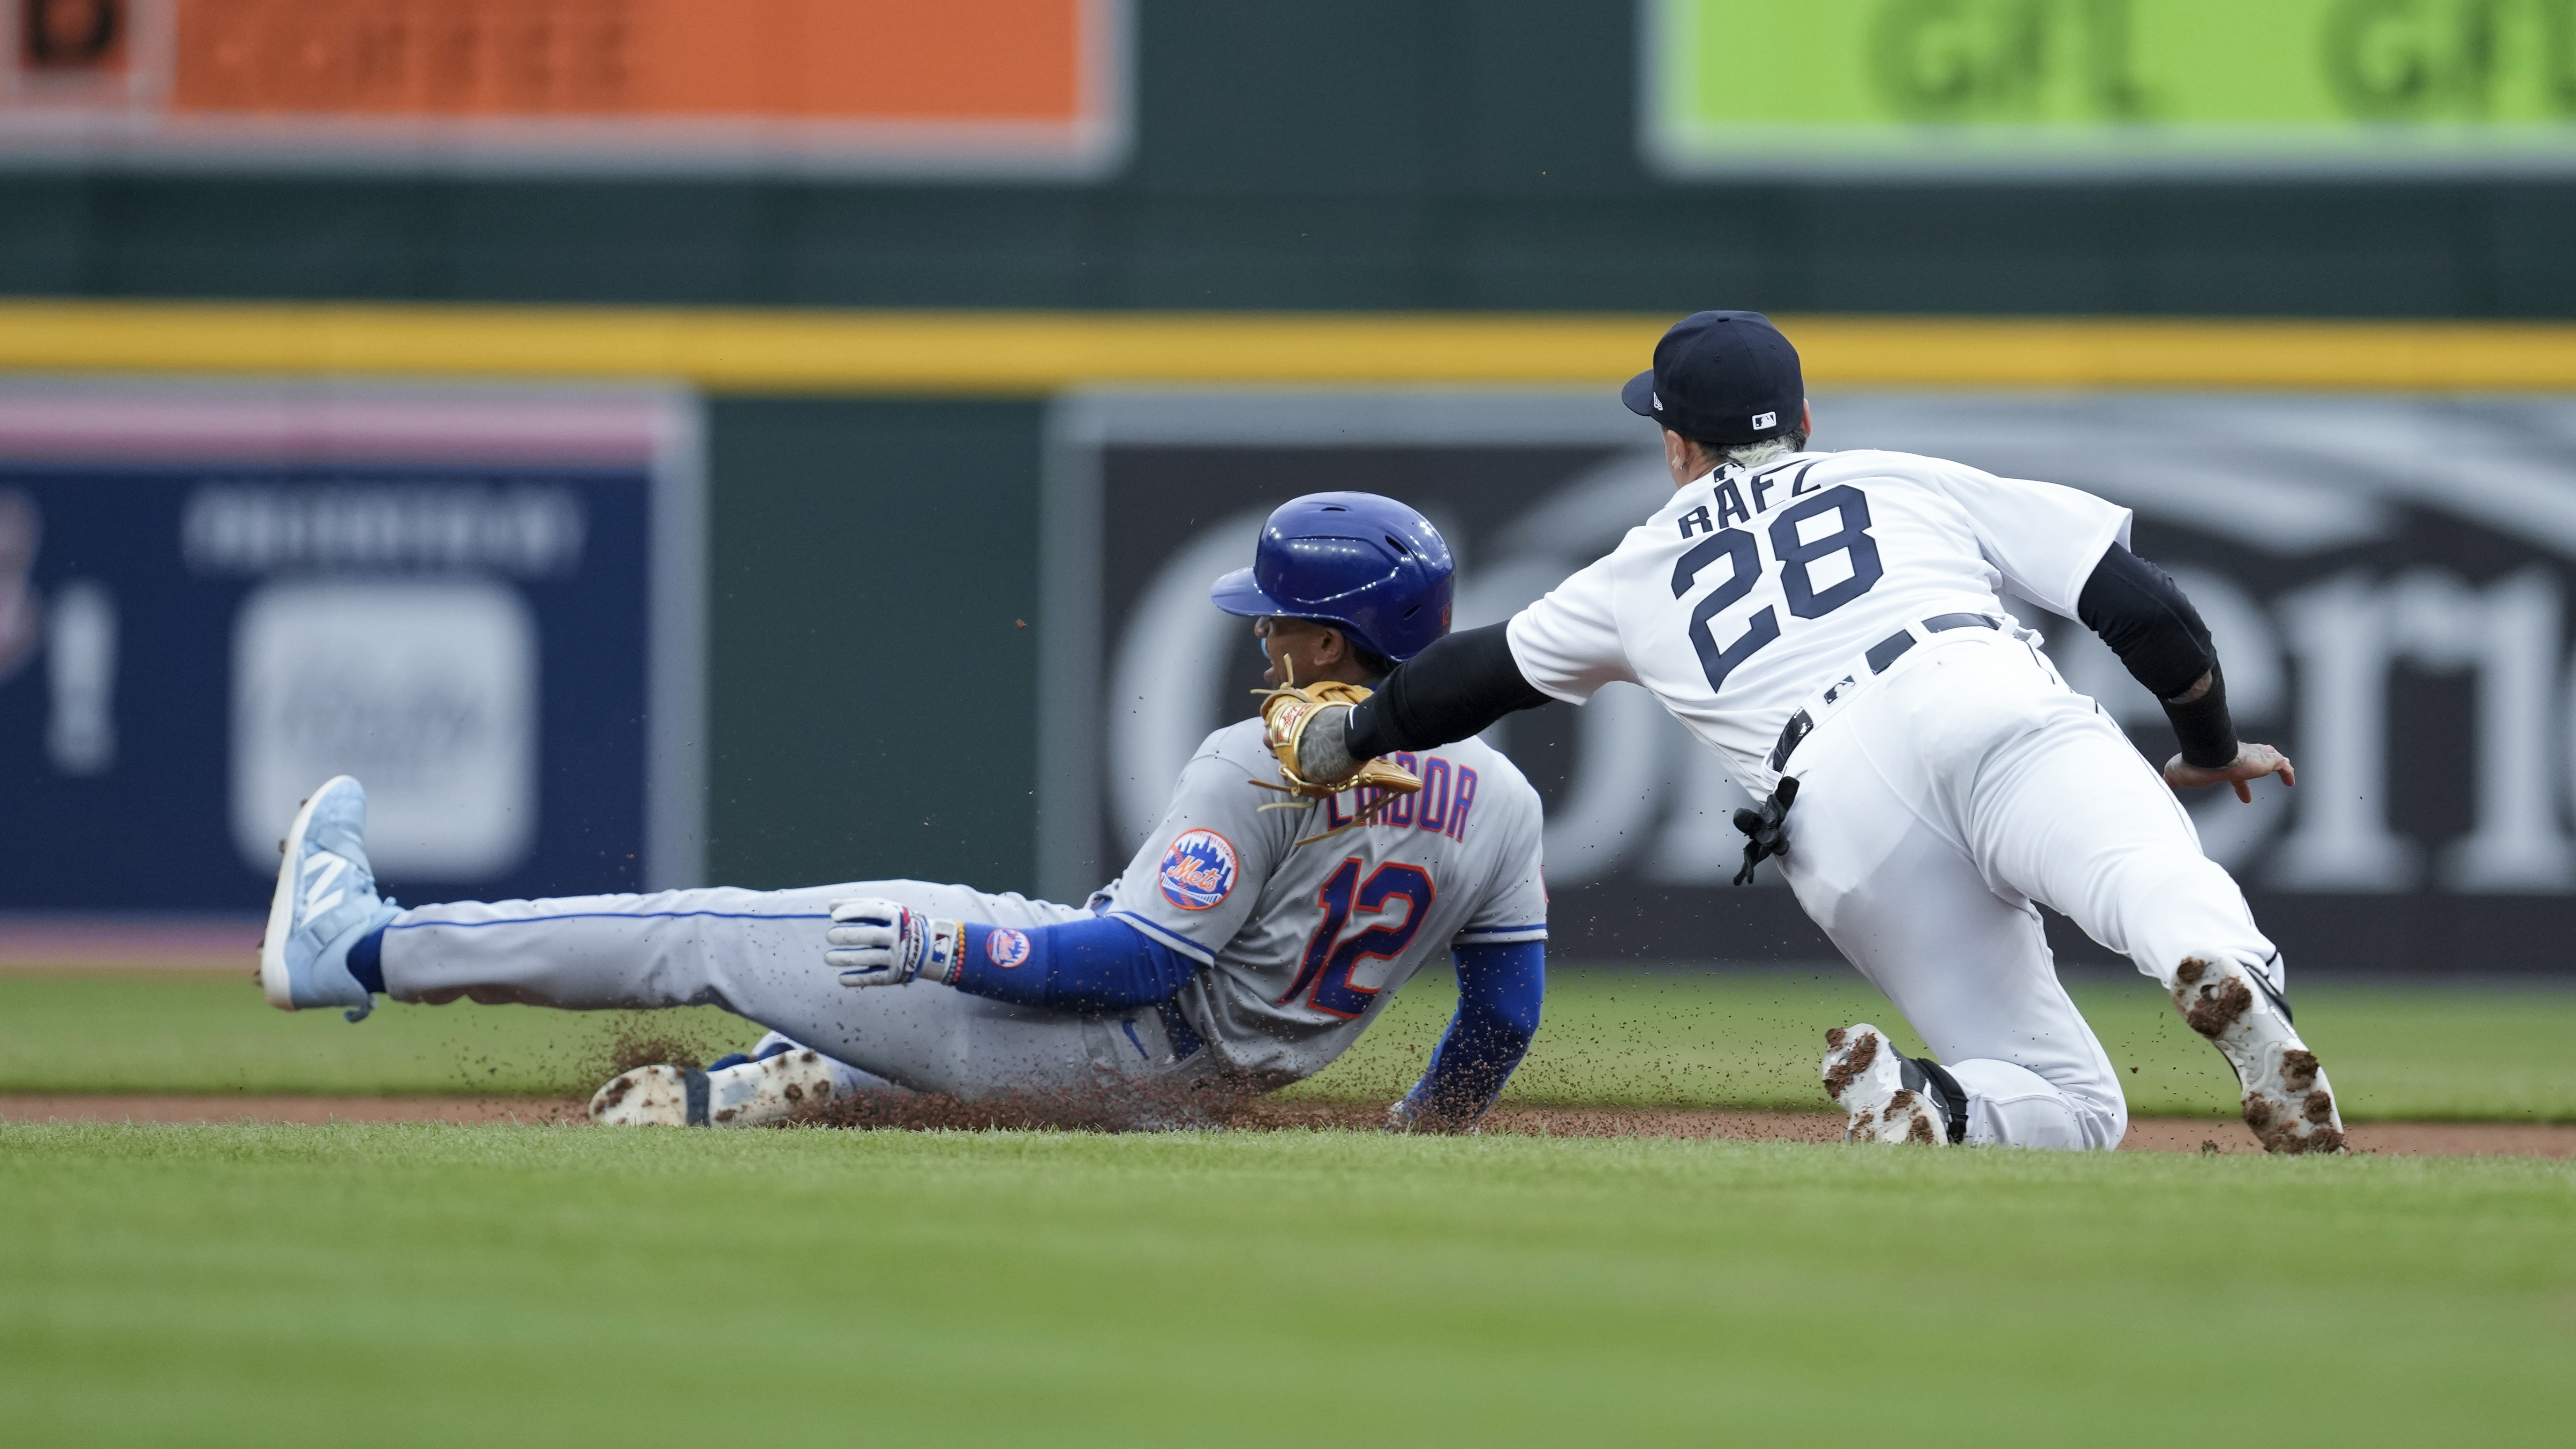 Series preview: Twins open six-game homestand against Mets